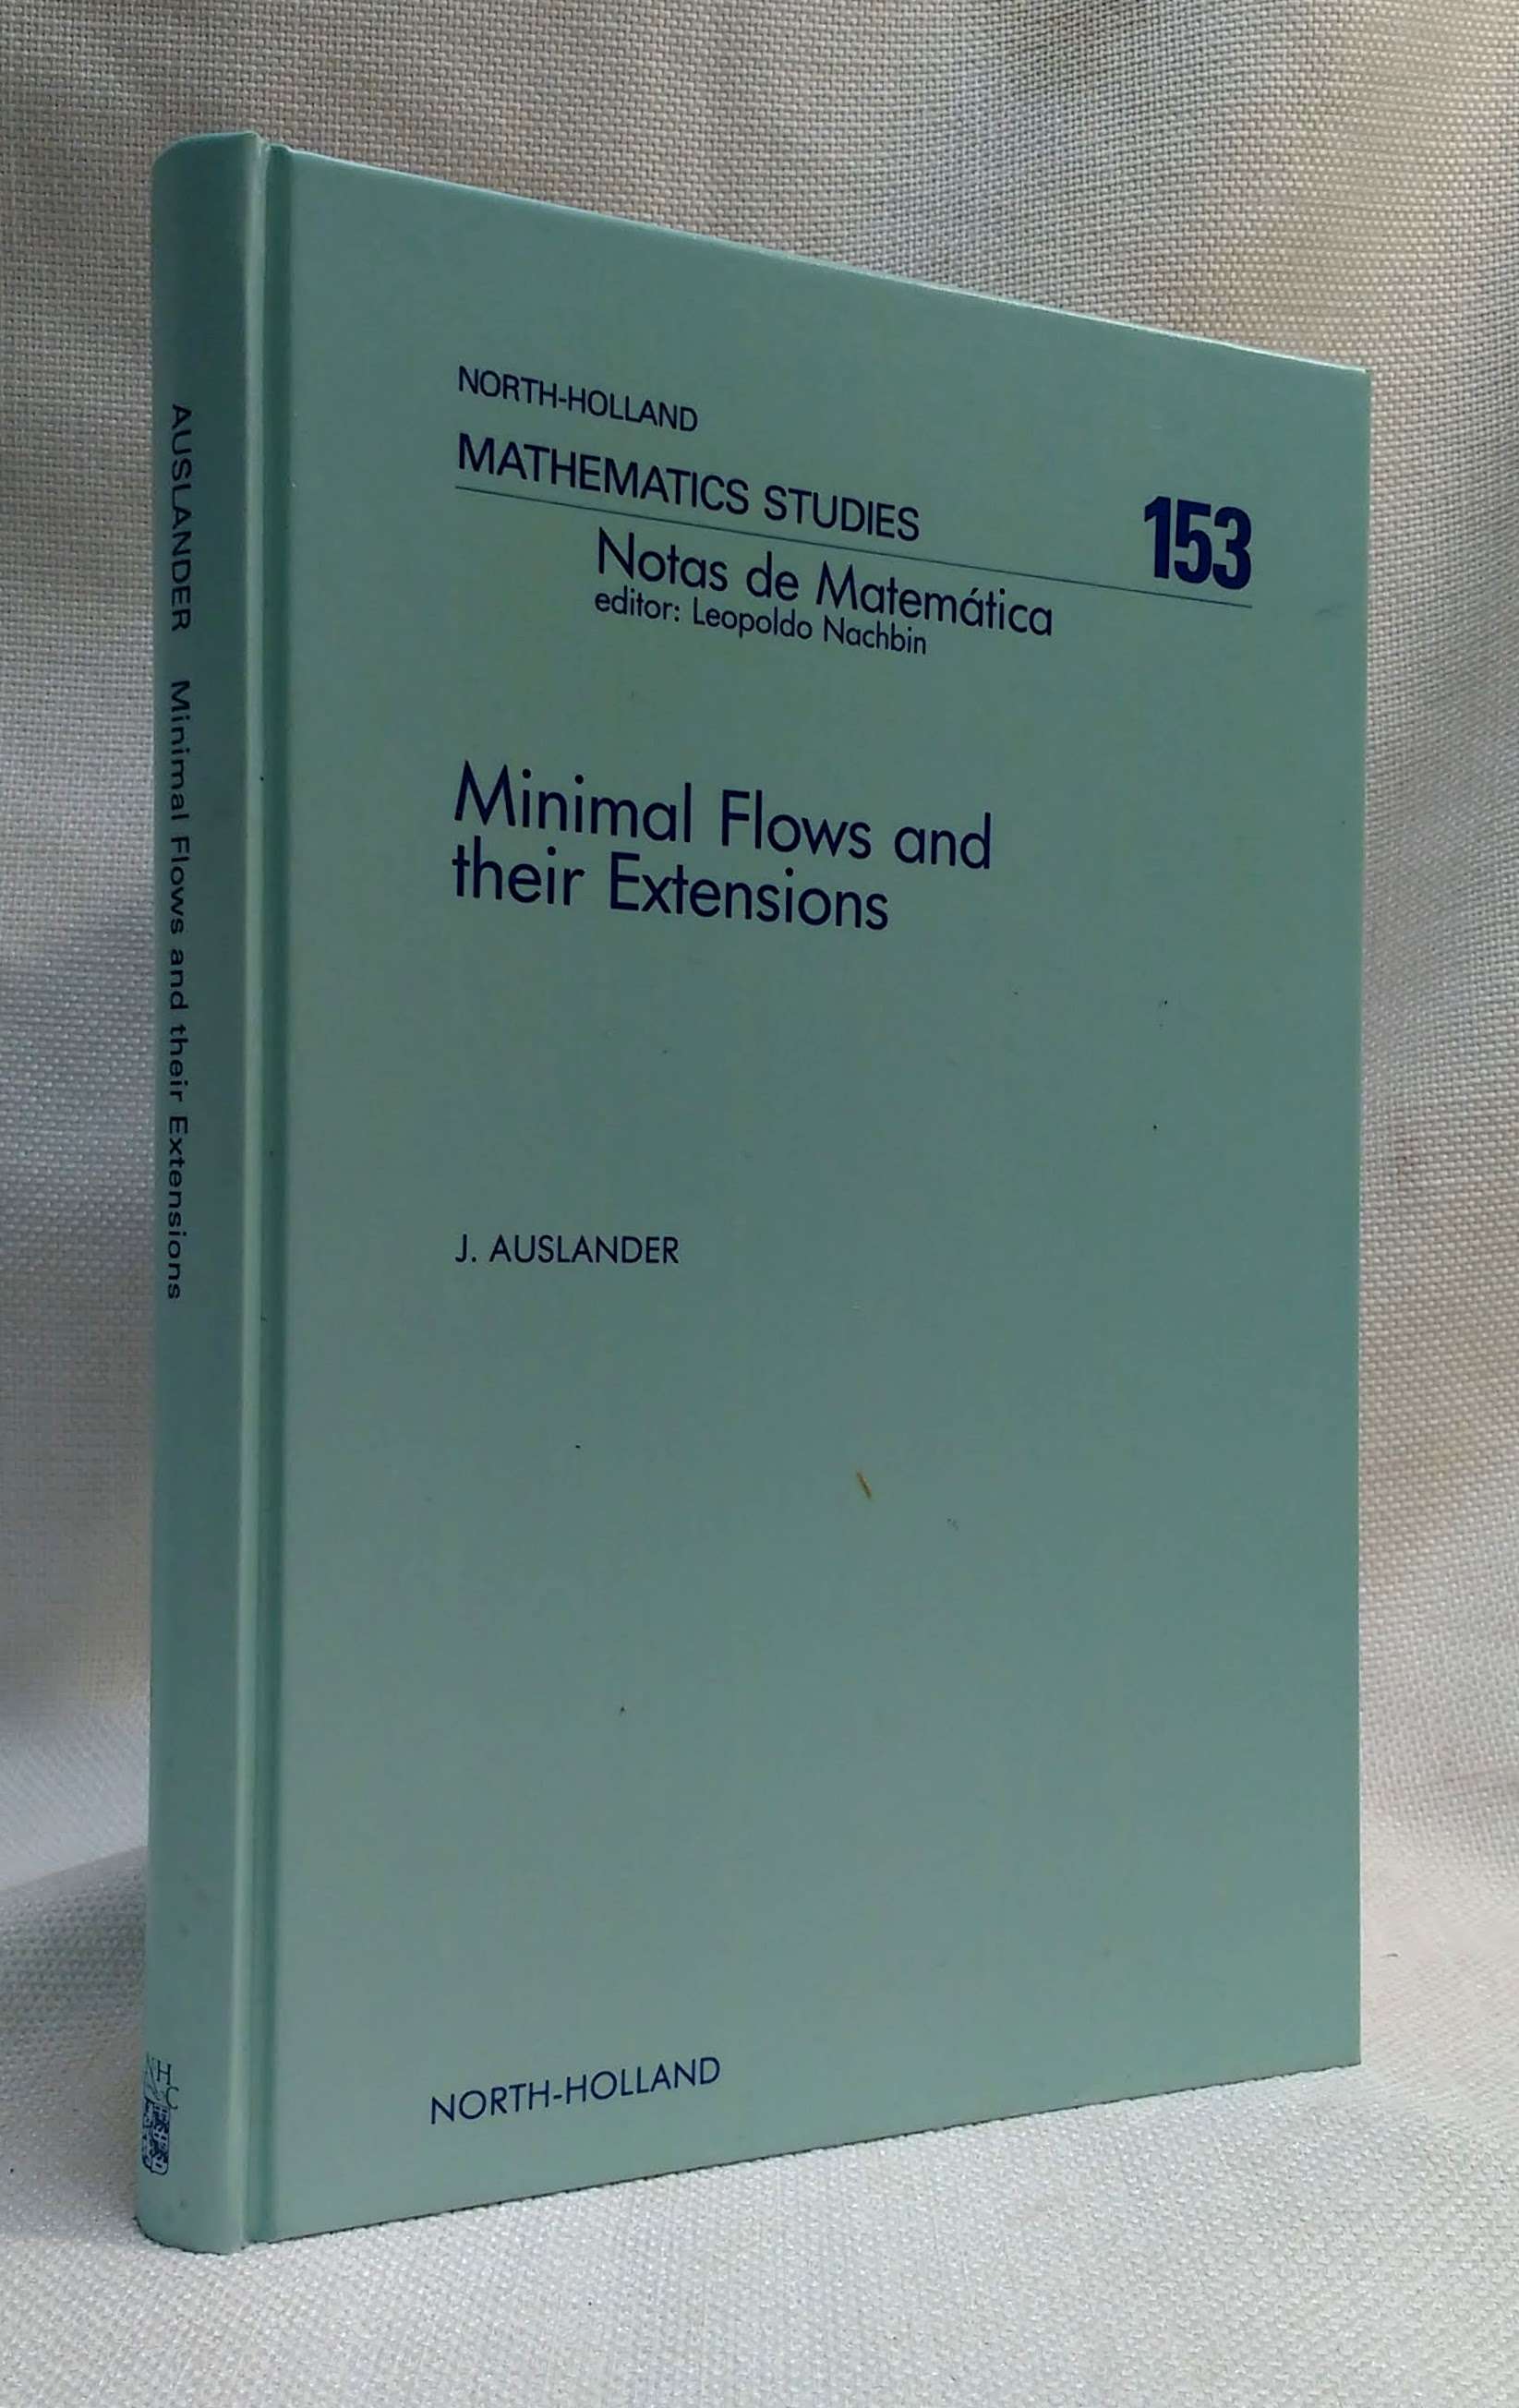 Image for Minimal Flows and Their Extensions (North-Holland Mathematics Studies, Volume 153 / Notas De Matematica, Vol 122)